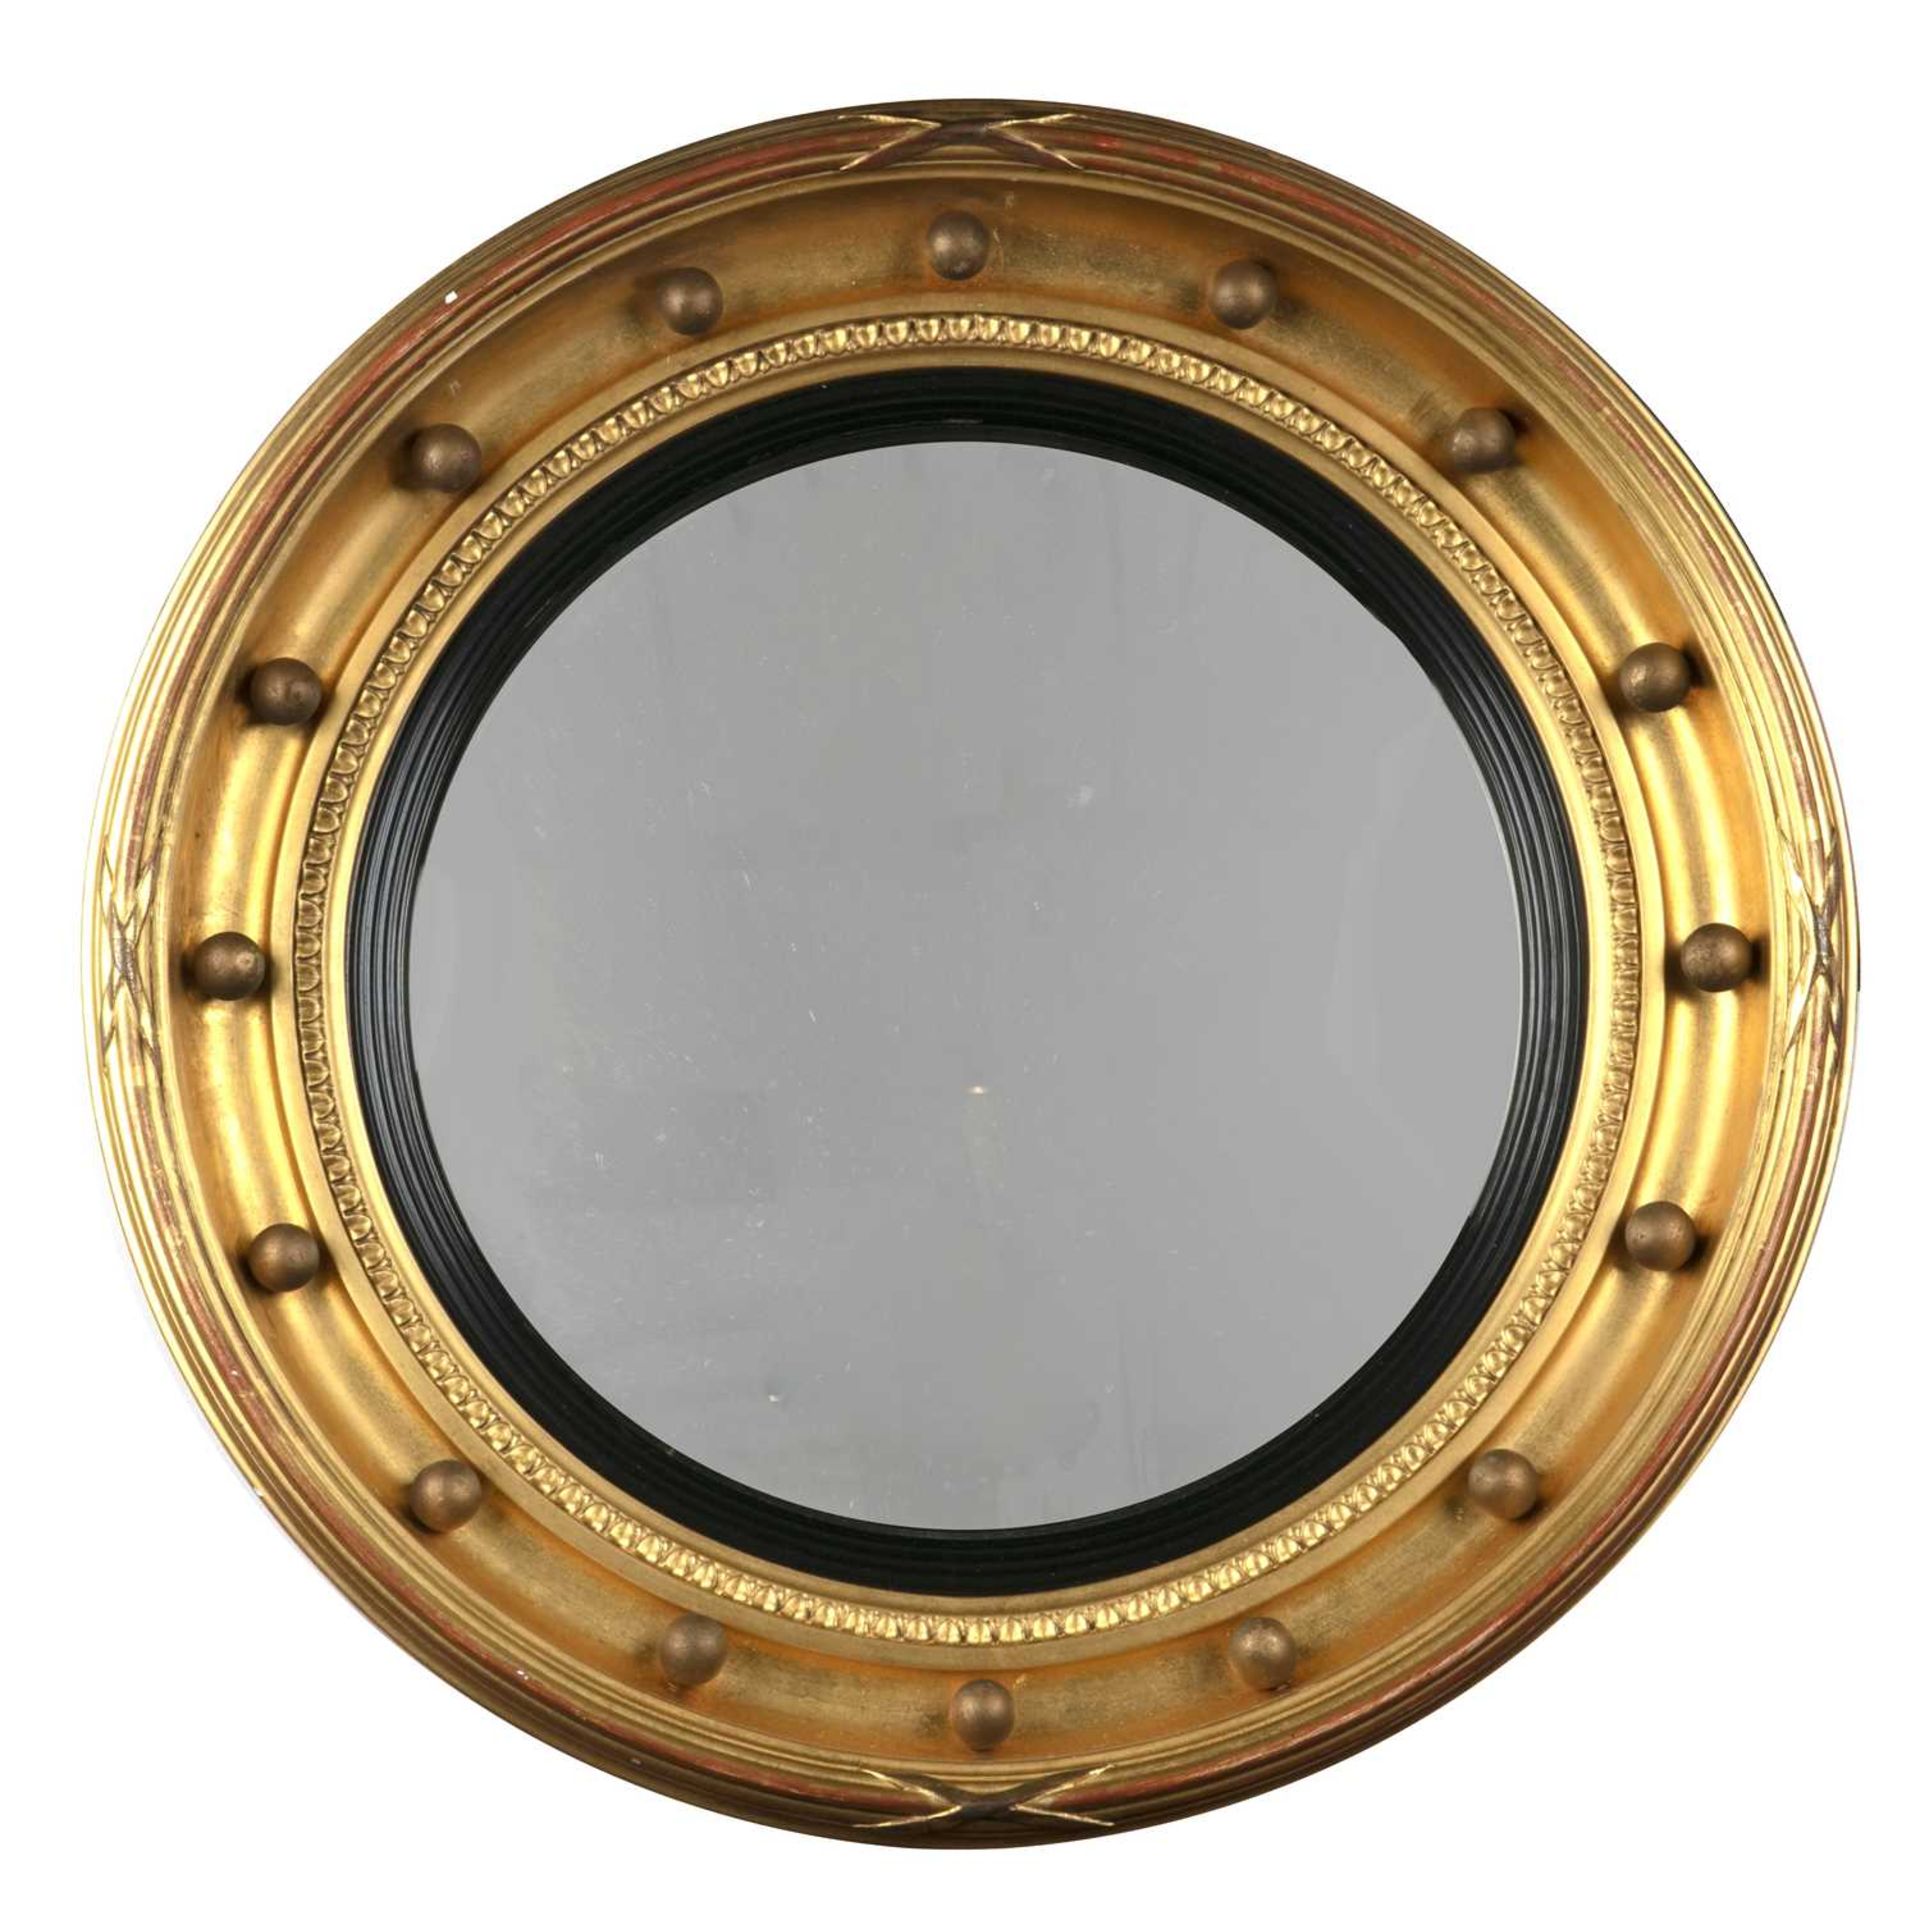 Gilt convex wall mirror 19th Century, with a reeded border and ebonised reeded slip, 57cm